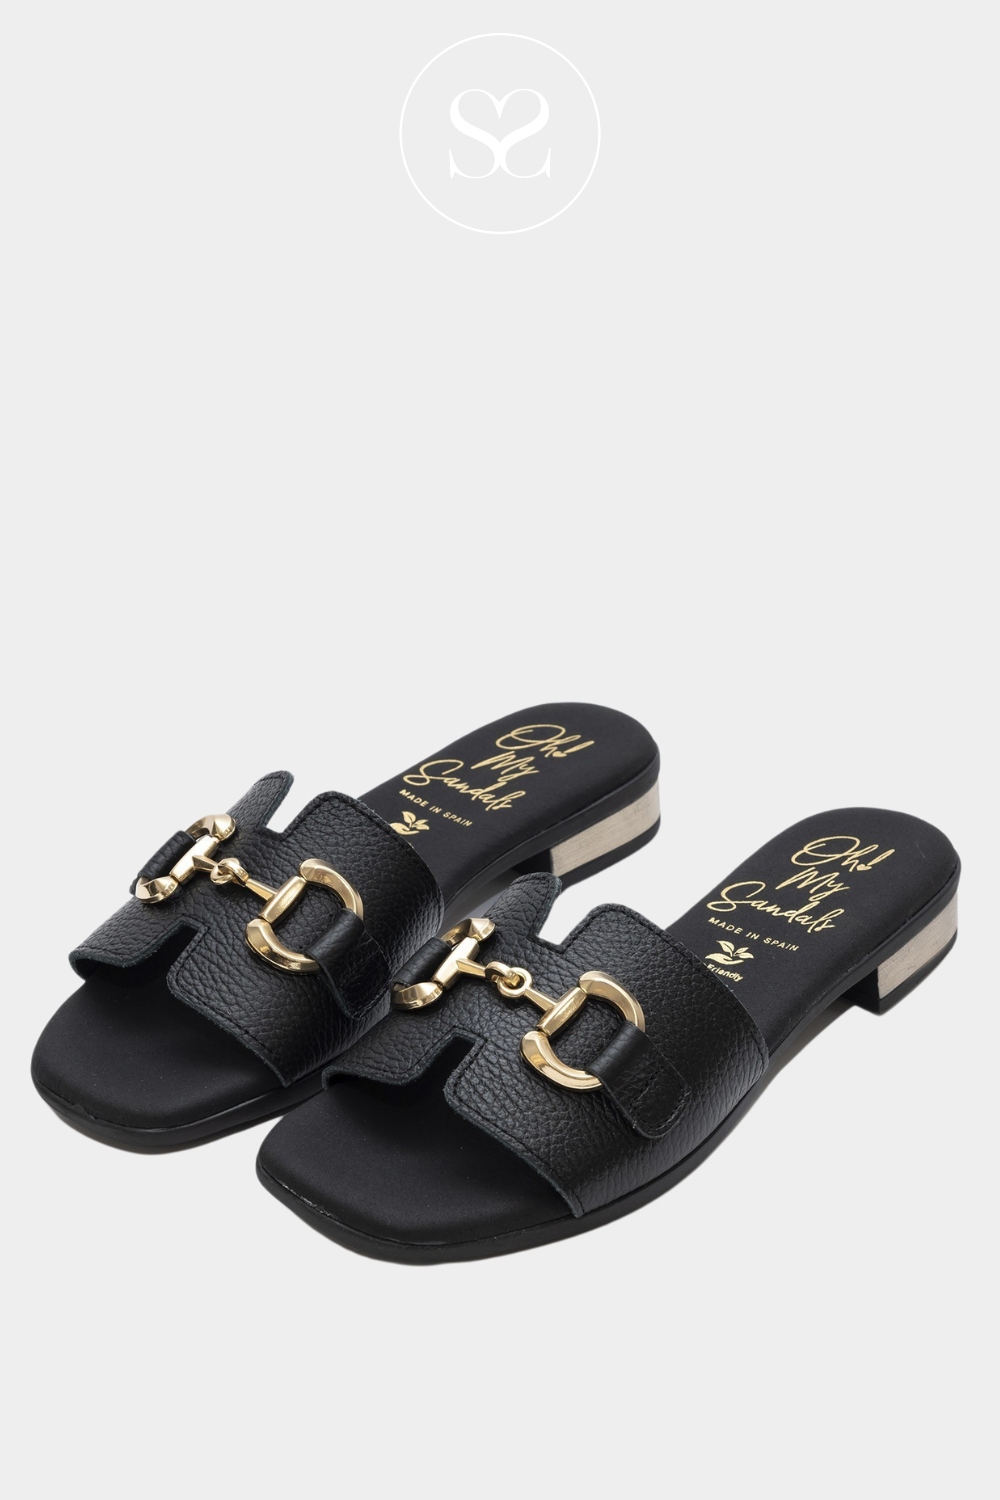 OH MY SANDALS 5340 BLACK LEATHER FLAT SLIDER SANDALS WITH SMALL HEEL AN GOLD CHAIN BUCKLE